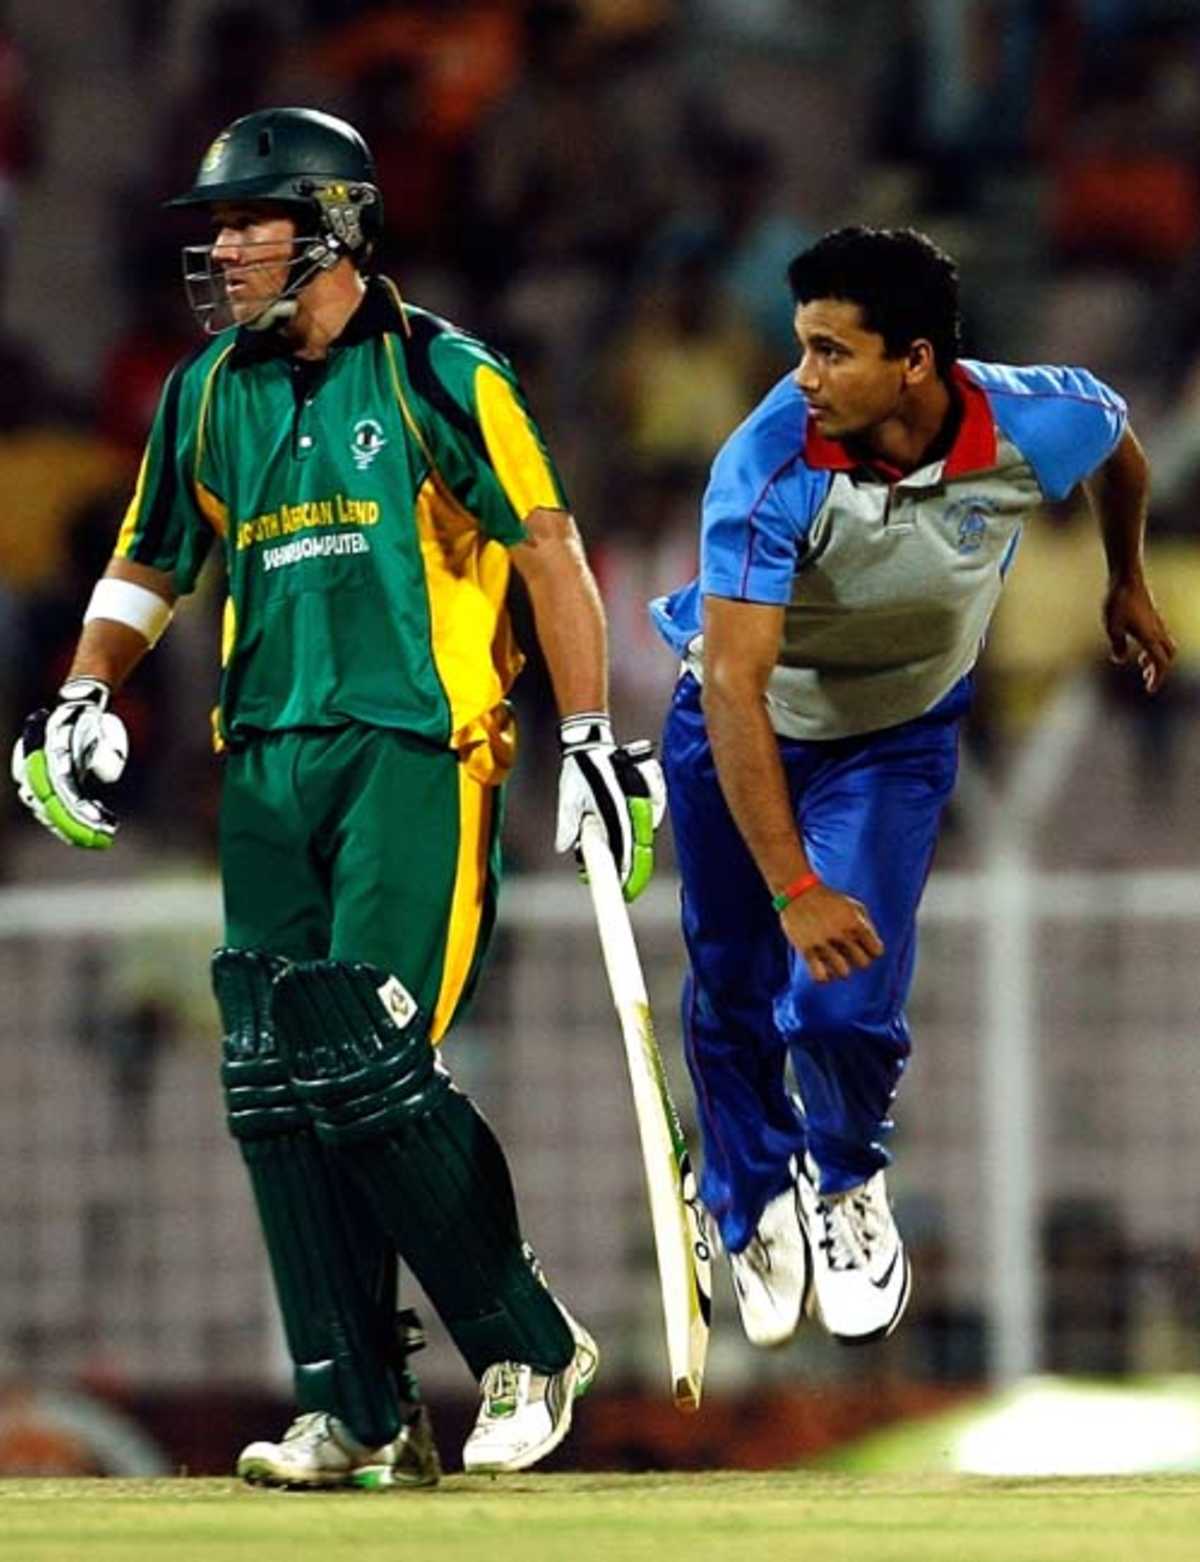 AB de Villiers looks on as Mashrafe Mortaza is in his follow through at the third ODI of the Afro-Asia Cup at Chennai